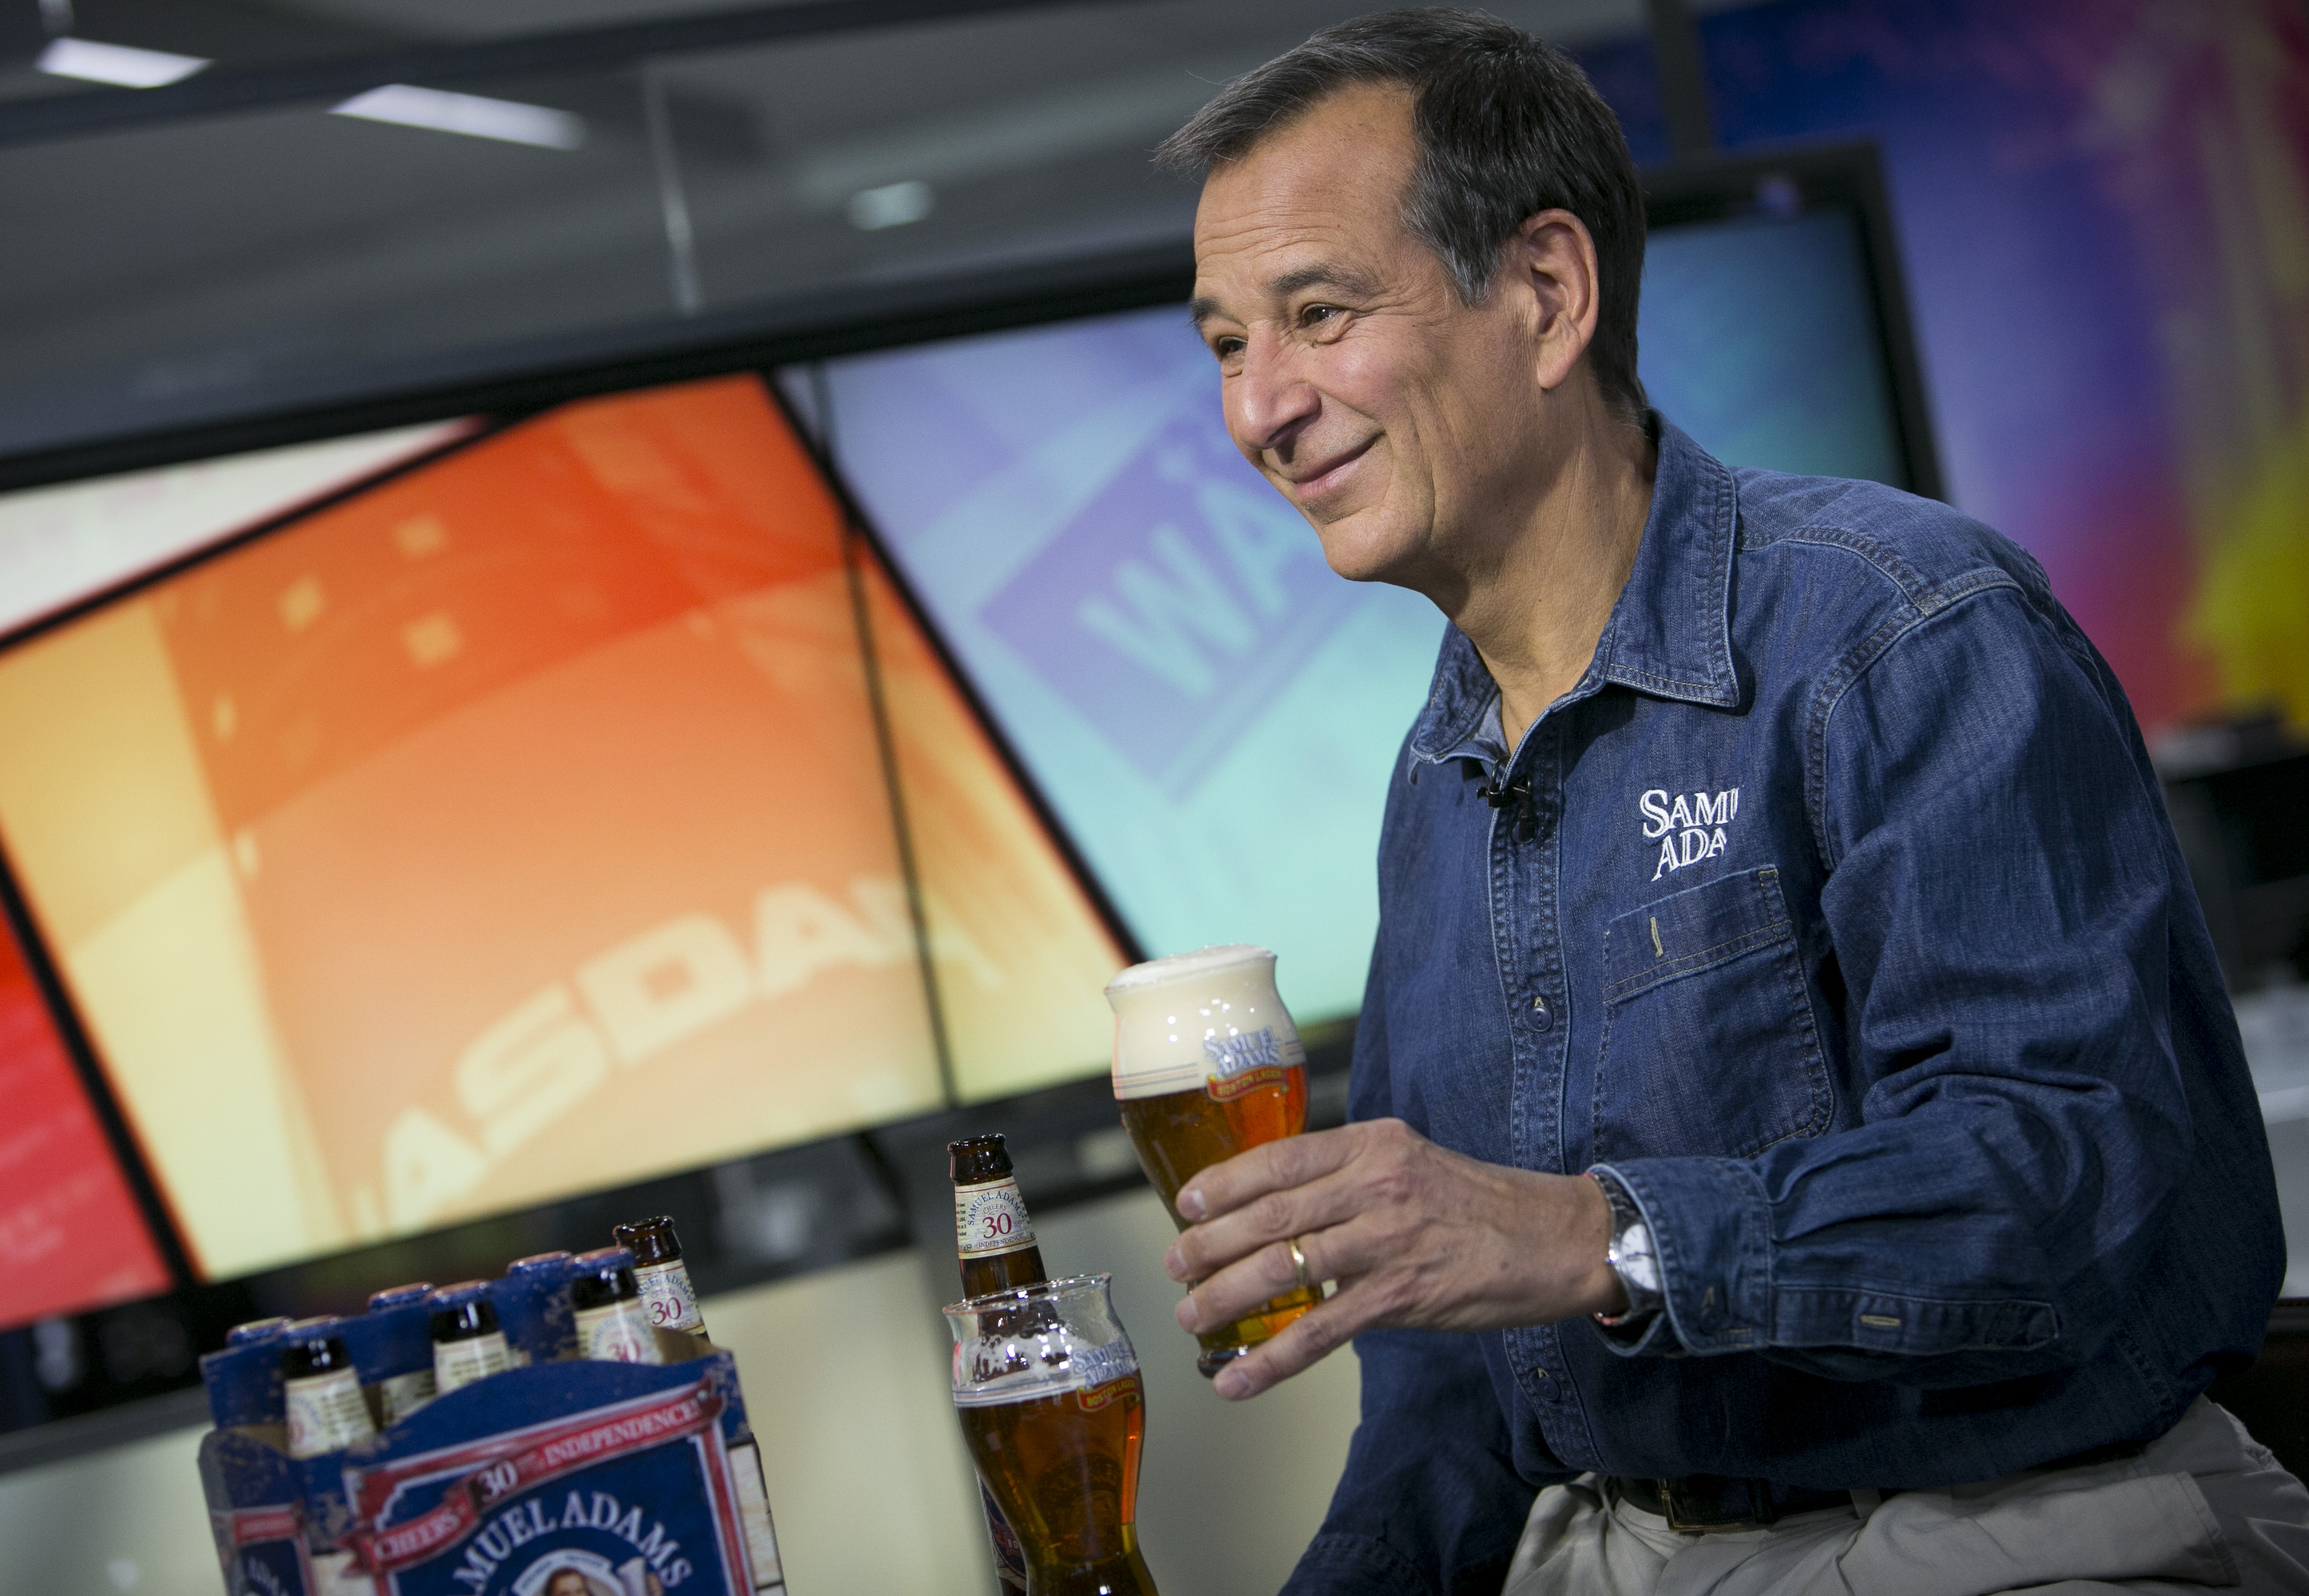 Why The Billionaire Co-Founder of the Boston Beer Company Drives an Old Ford Car